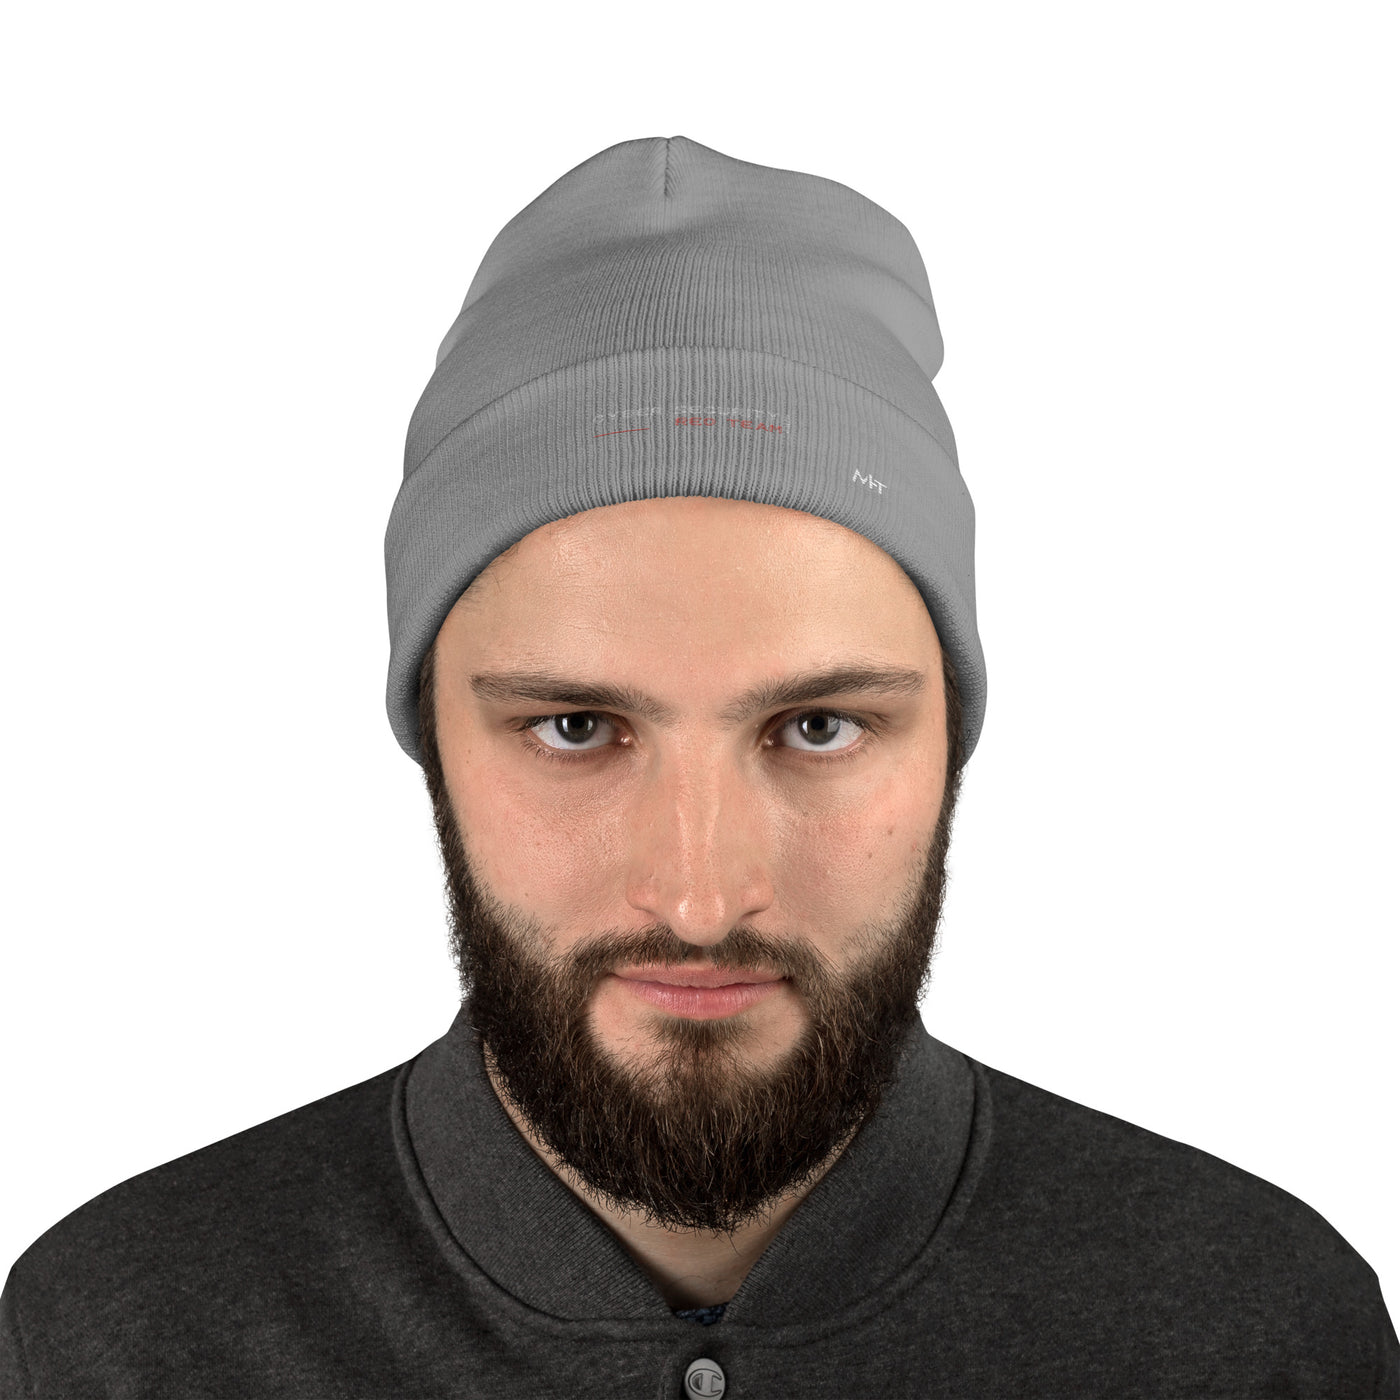 Cyber Security Red Team V2 - Embroidered Beanie